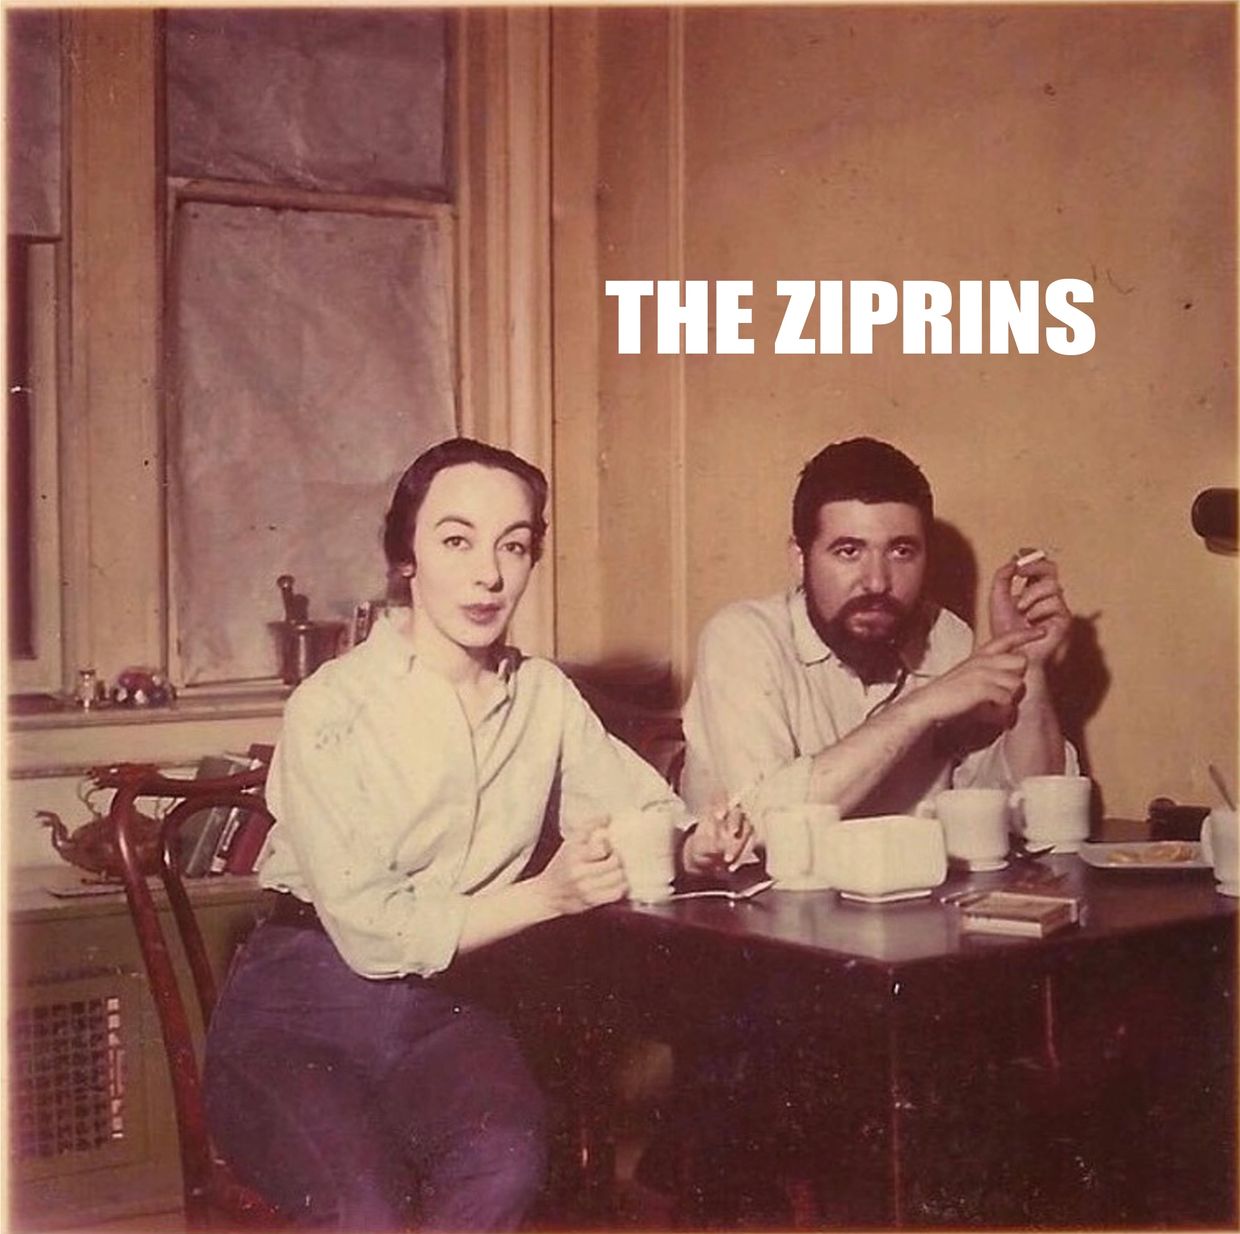 LIONEL ZIPRIN and JOANNE ZIPRIN at TABLE LOWER EAST SIDE NYC 1950's 1960s Beat Generation